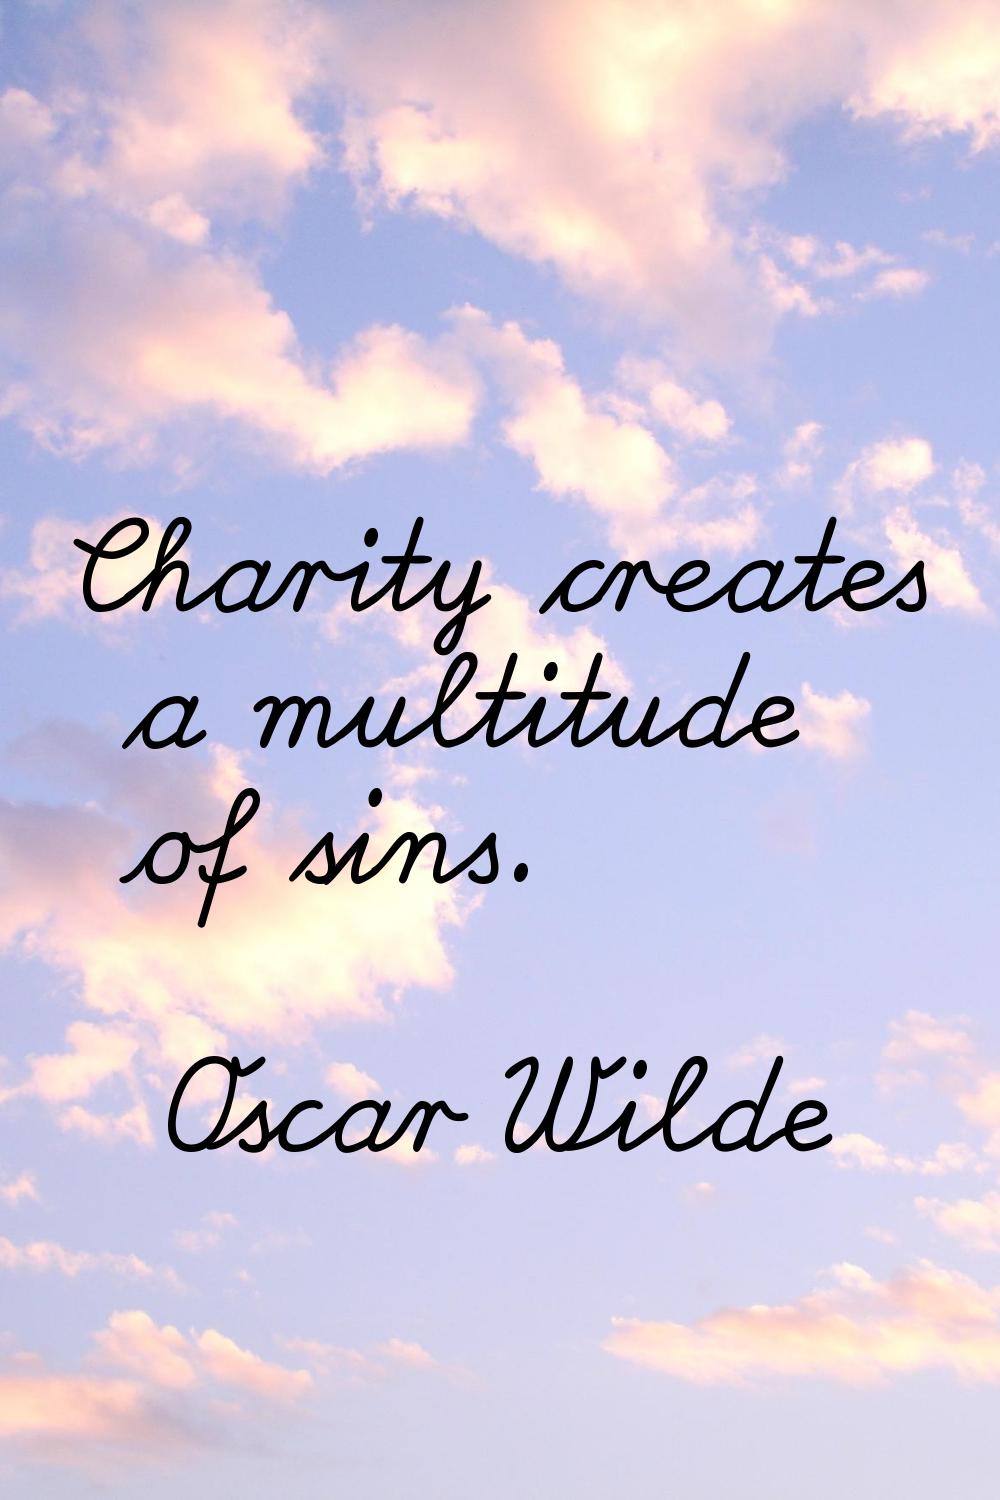 Charity creates a multitude of sins.